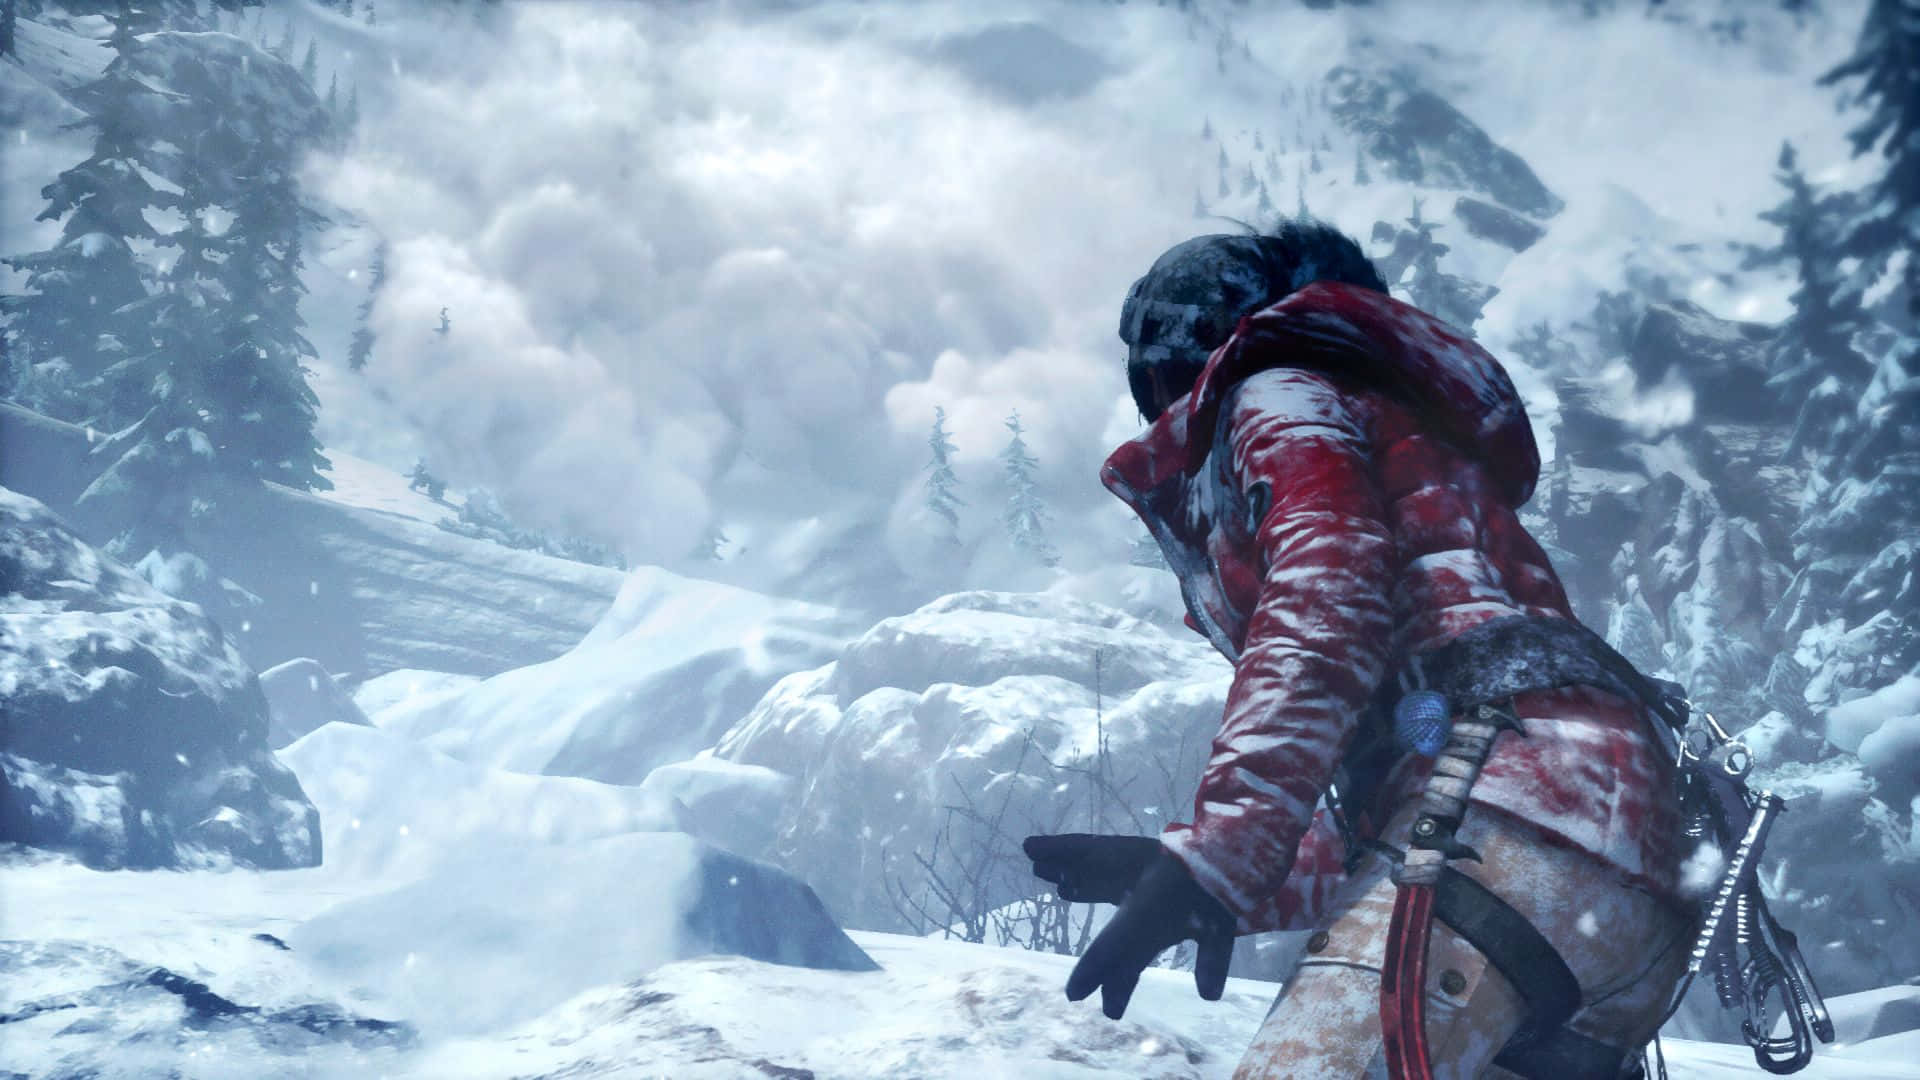 Lara Croft faces danger on her adventure in Rise Of The Tomb Raider